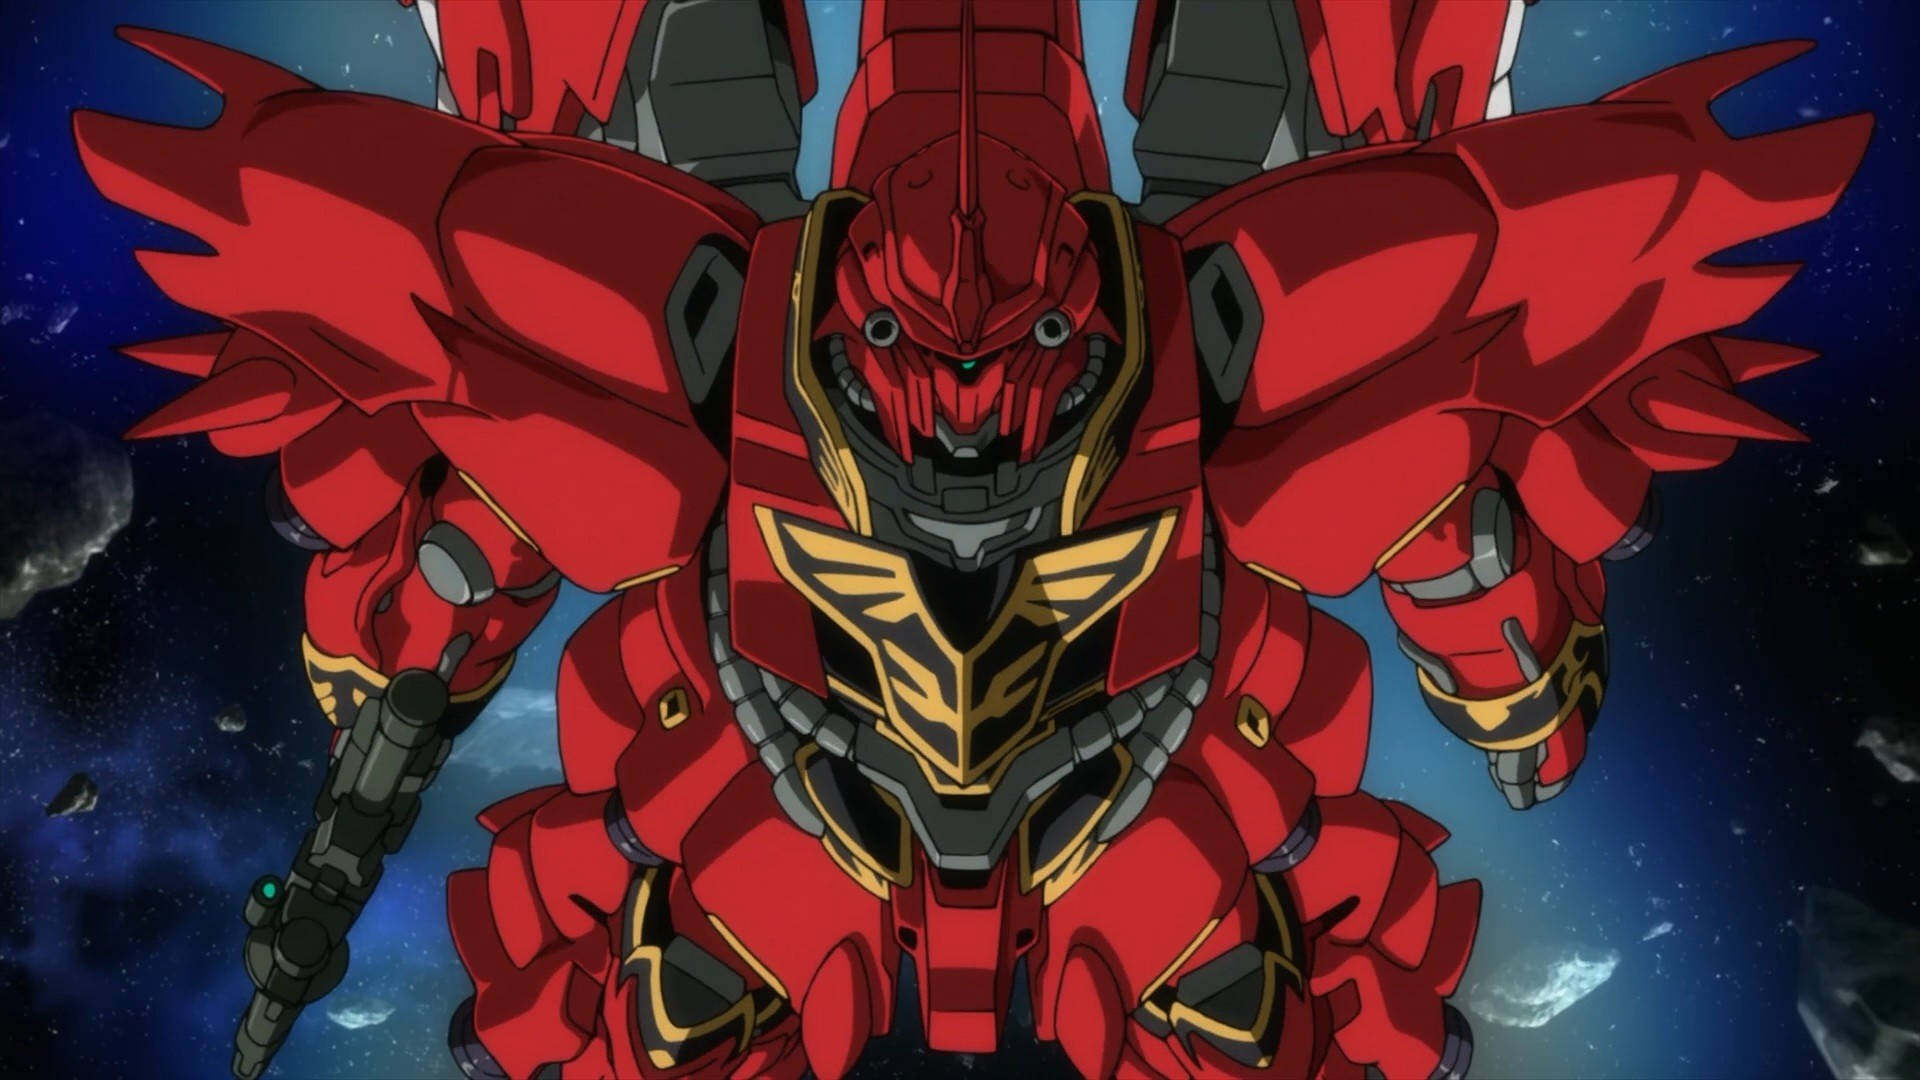 Red Mobile Suit Gundam In Space Background